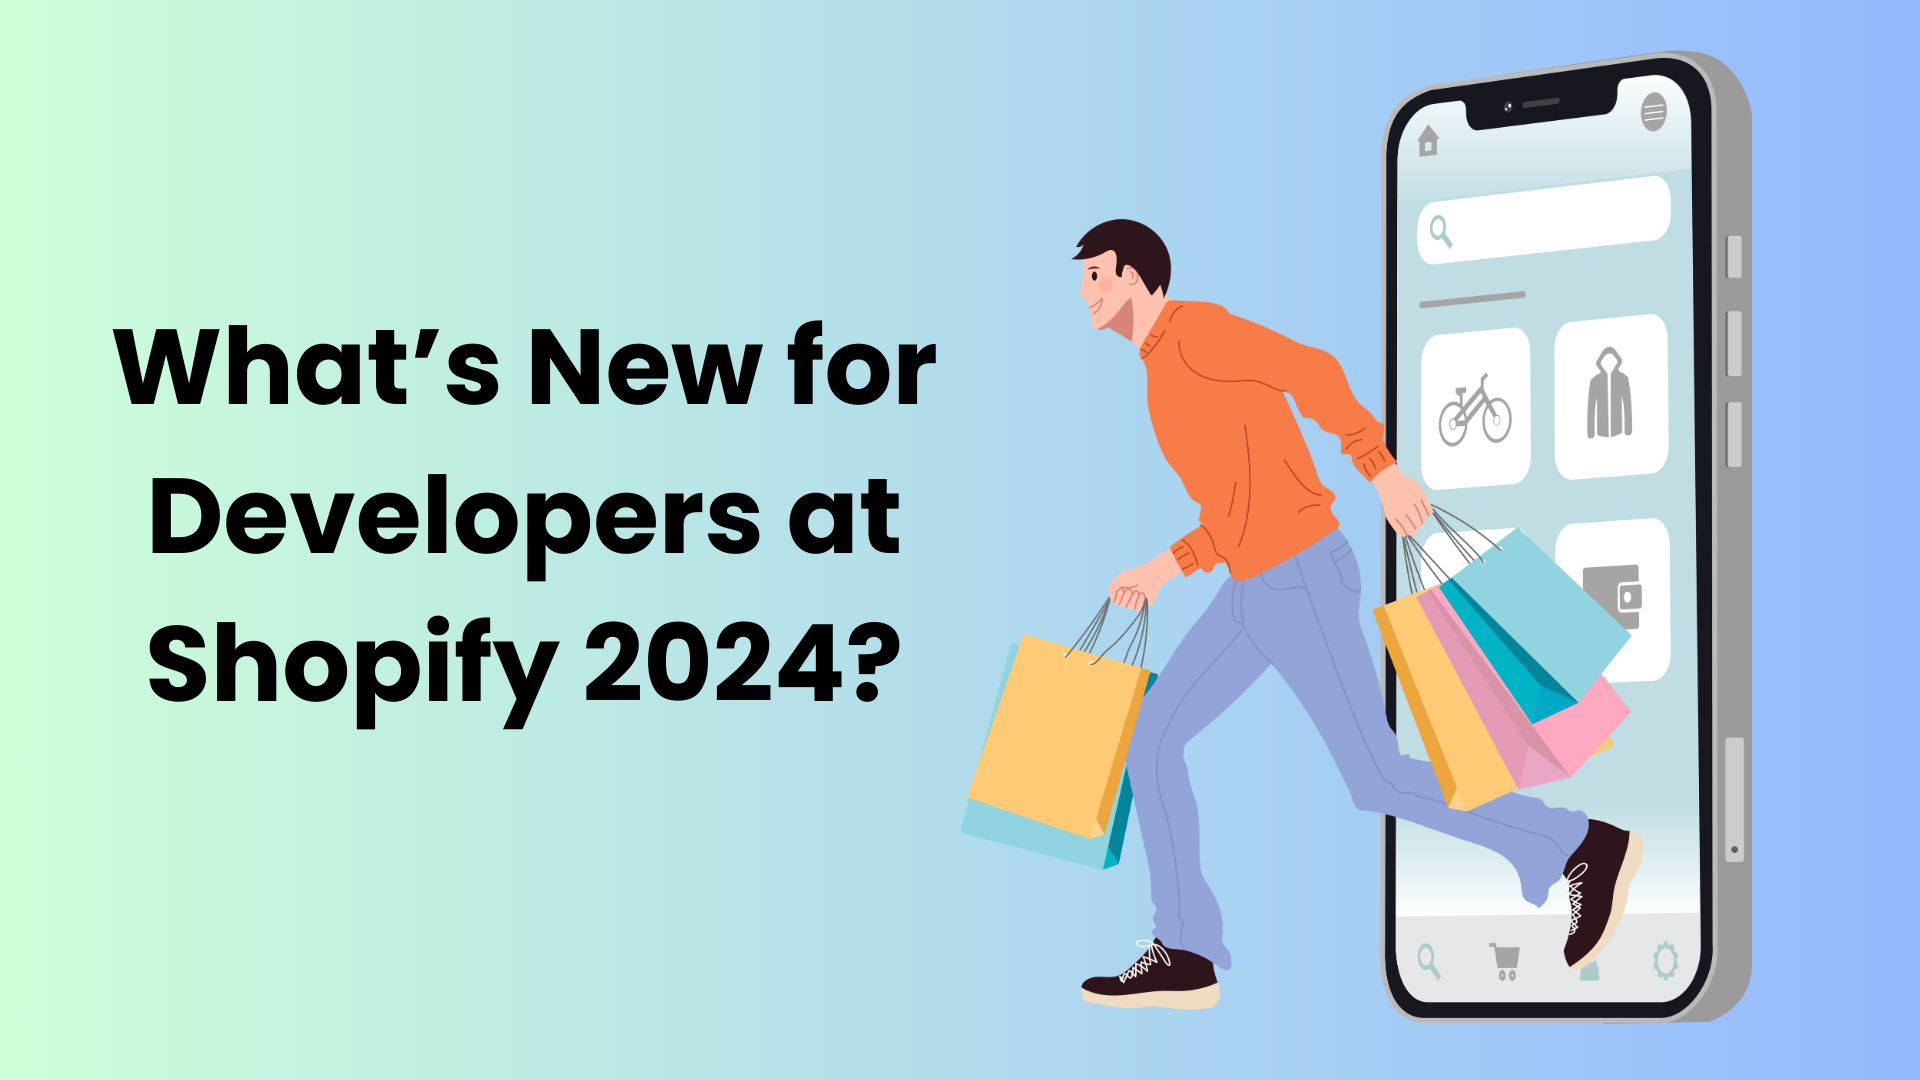 What’s New for Developers at Shopify 2024?